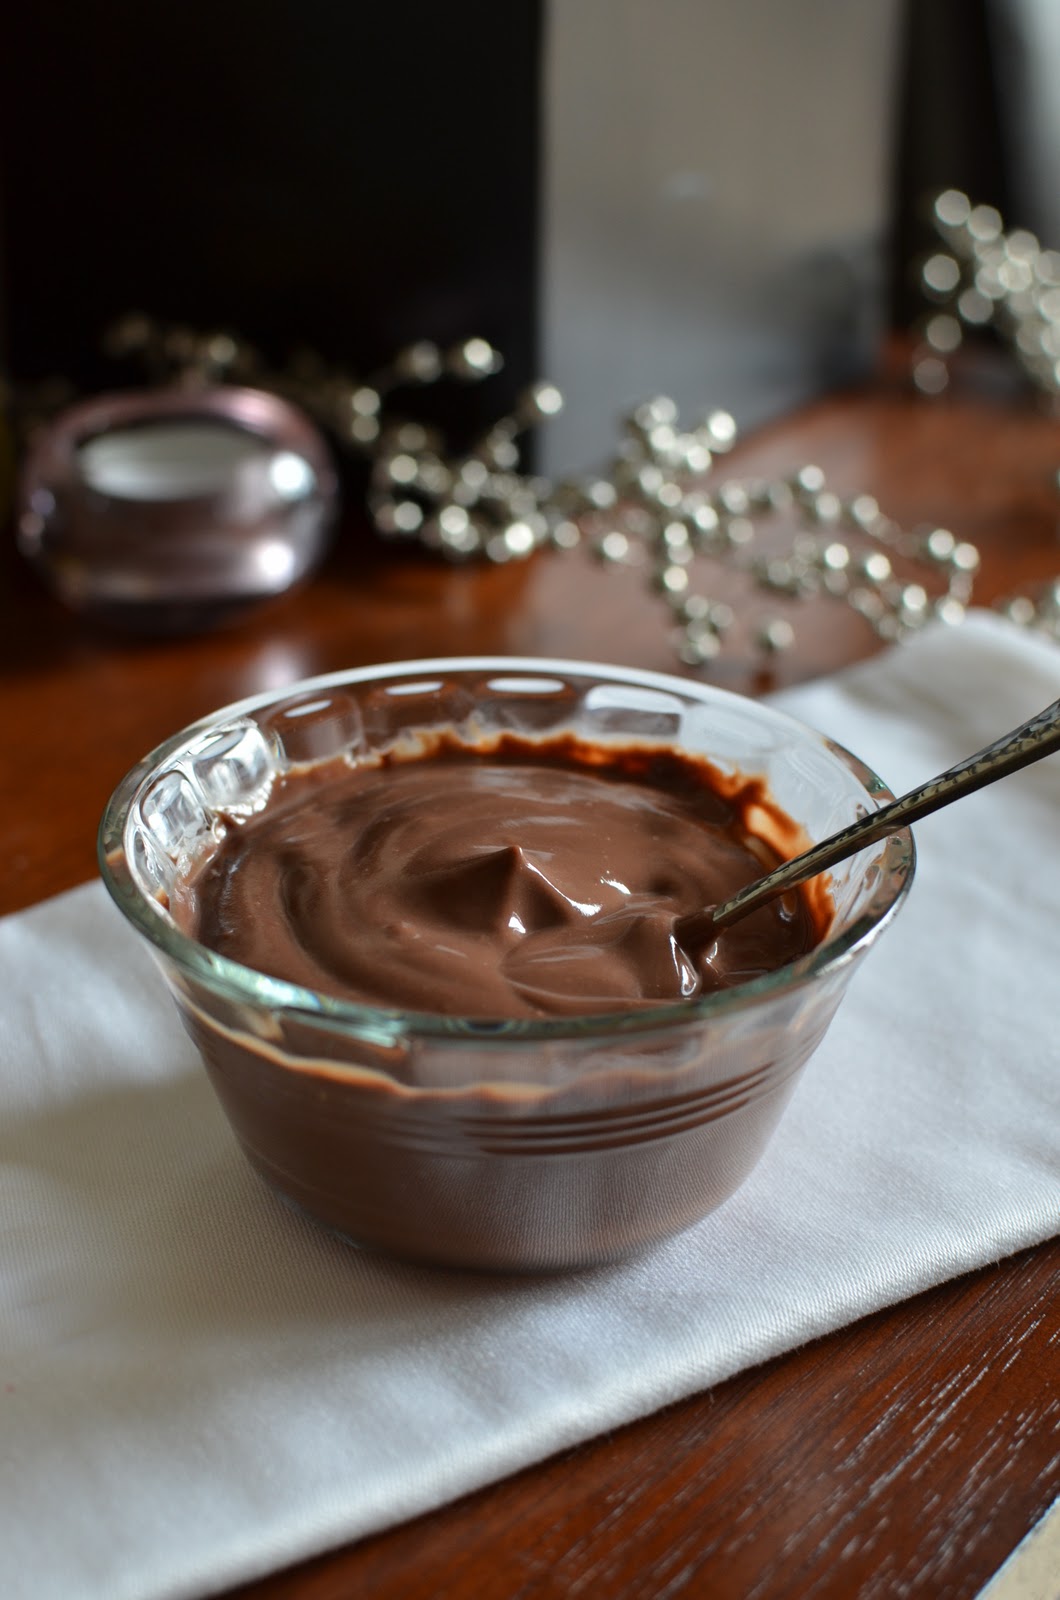 Playing with Flour: Everyday chocolate pudding